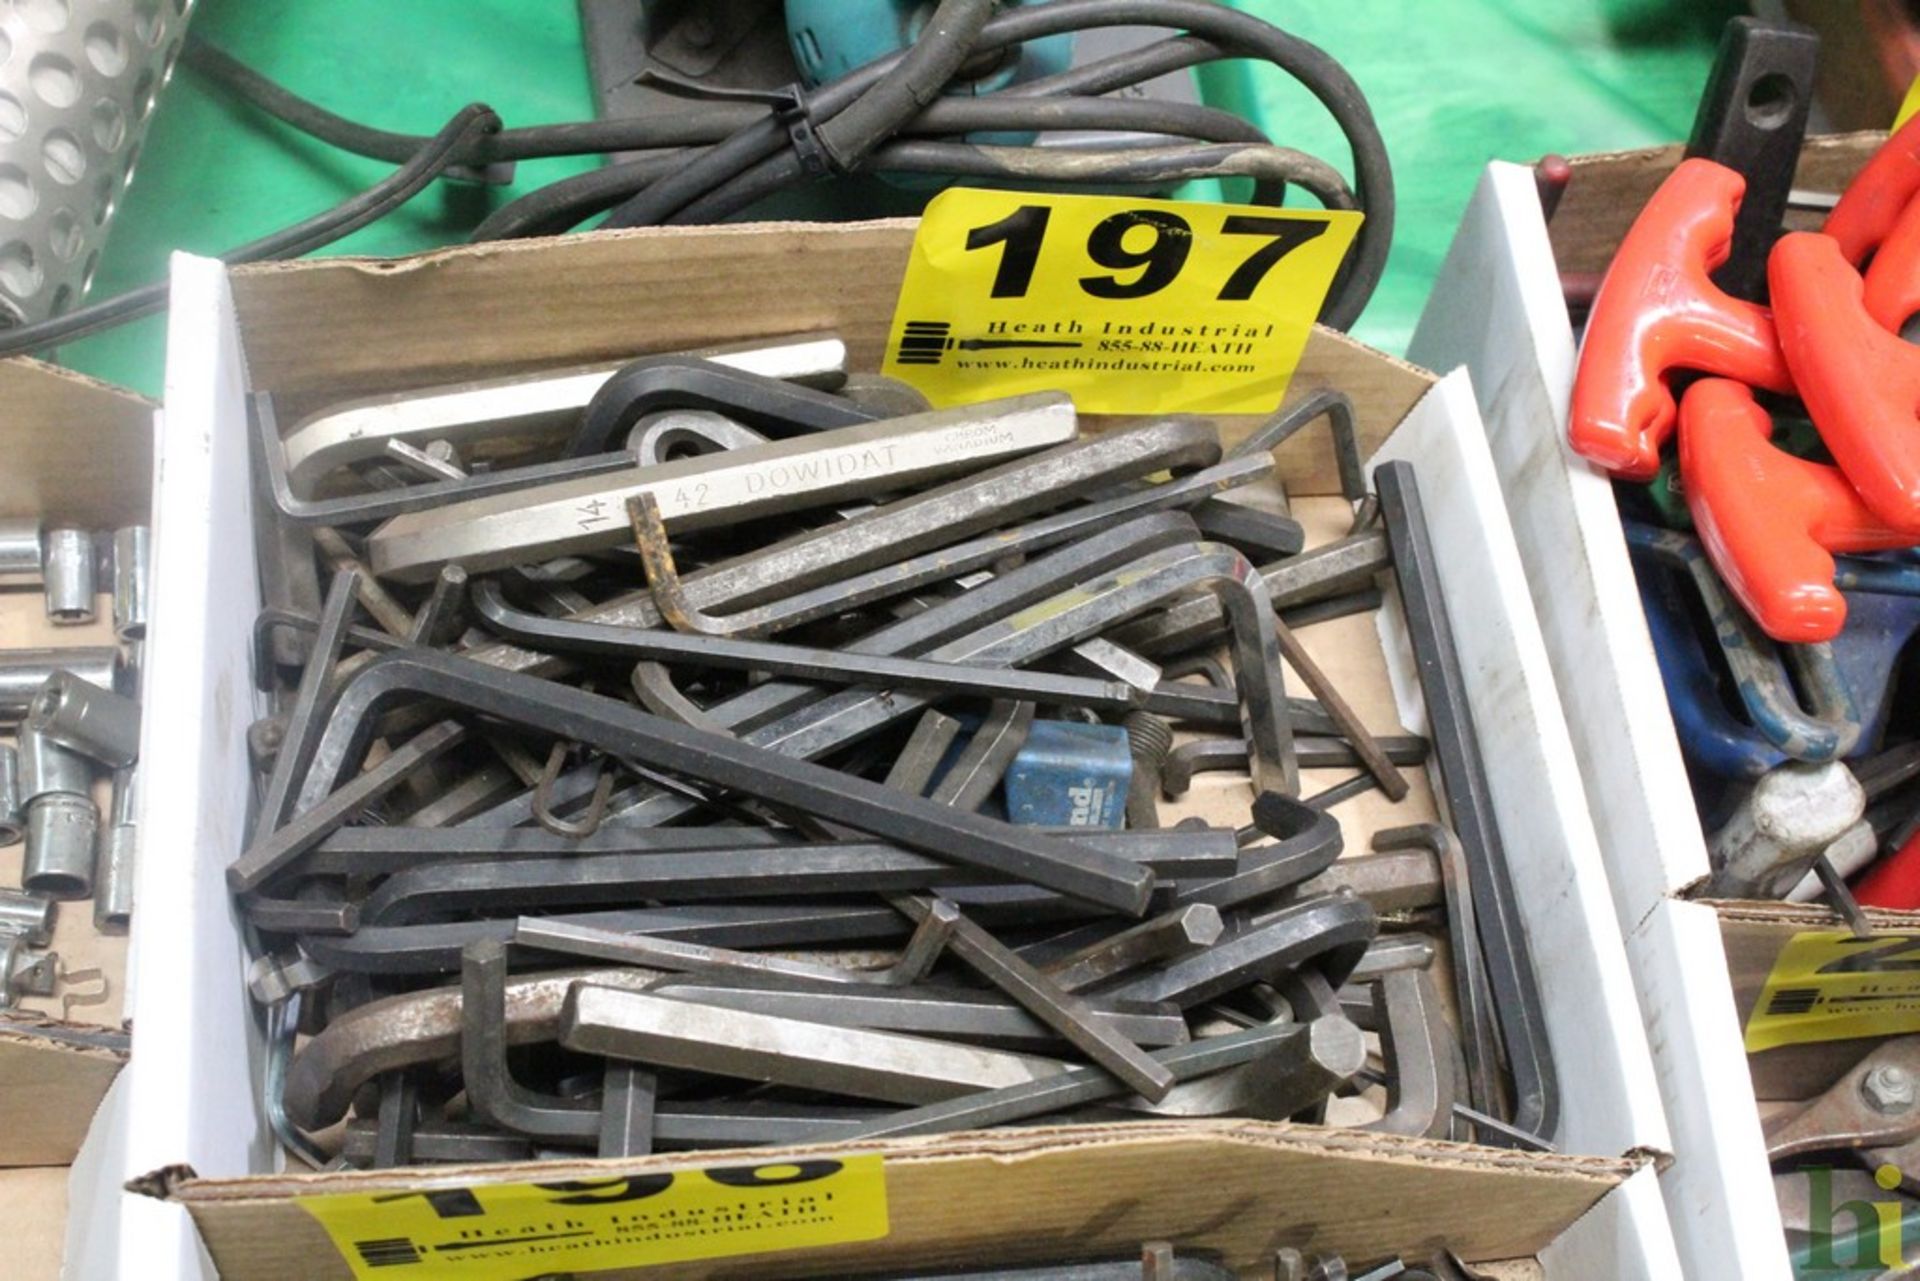 LARGE ASSORTMENT OF ALLEN WRENCHES IN BOX